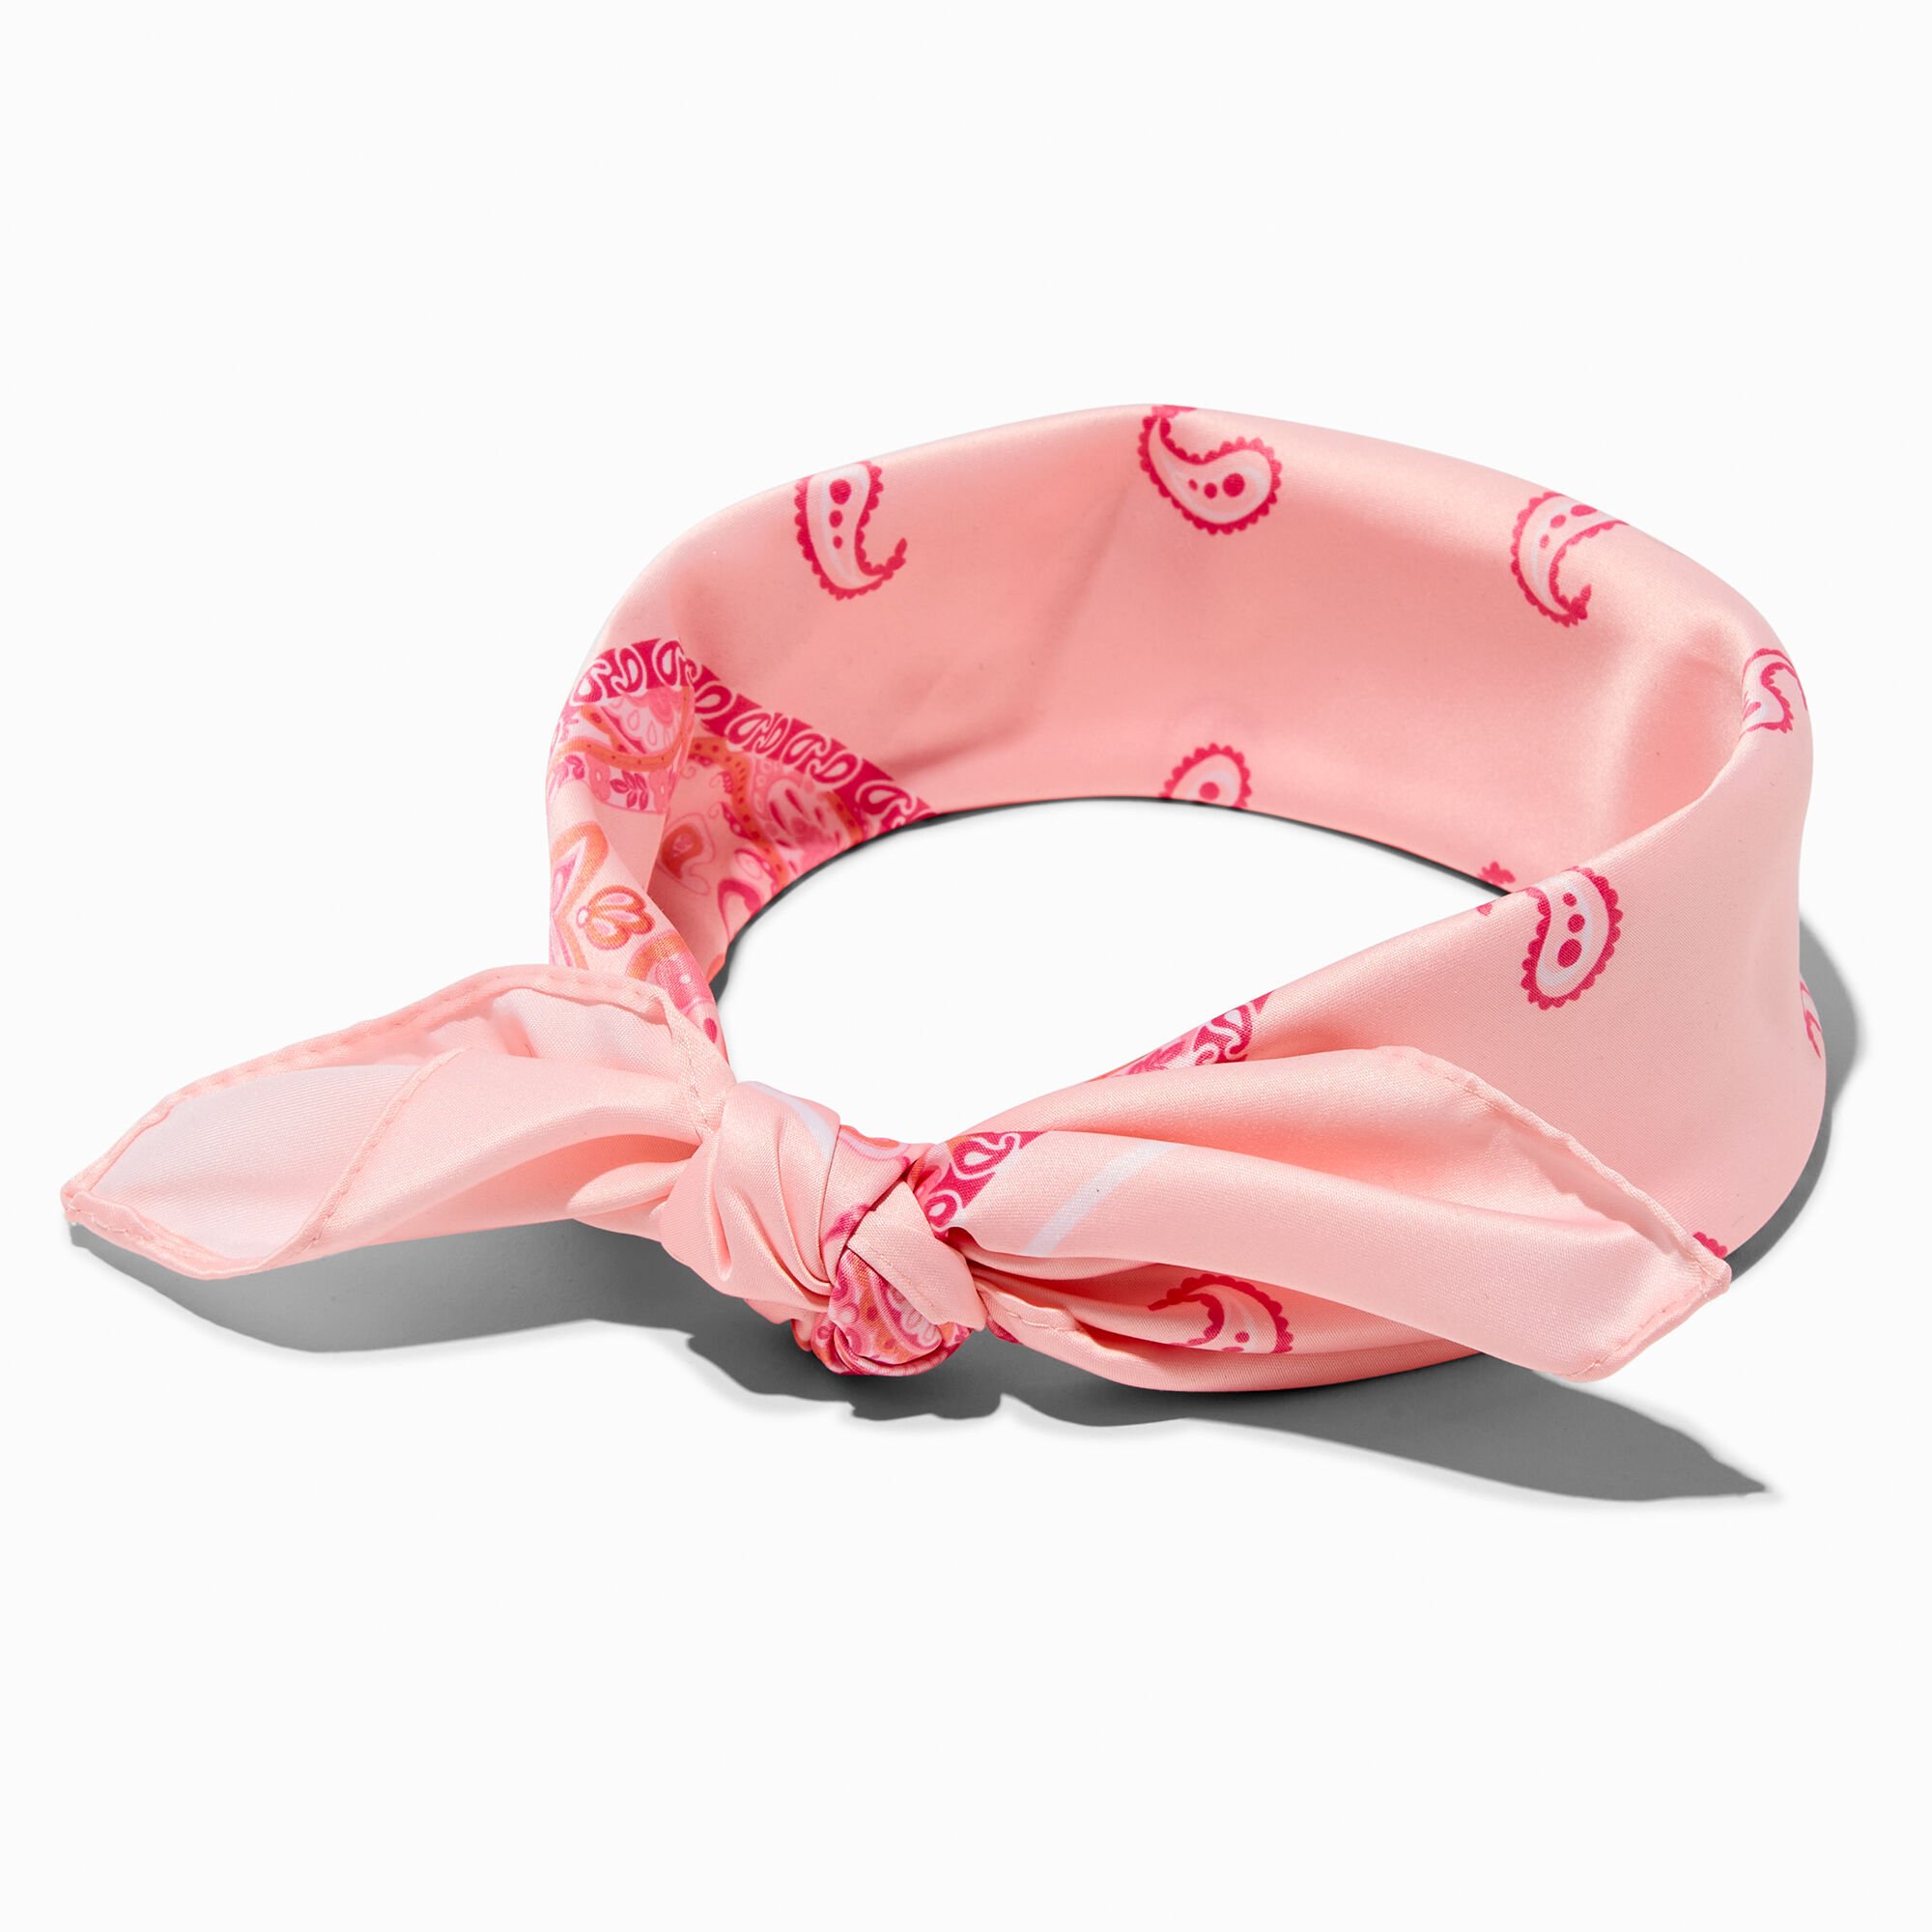 View Claires Paisley Silky Bandana Headwrap Pink information